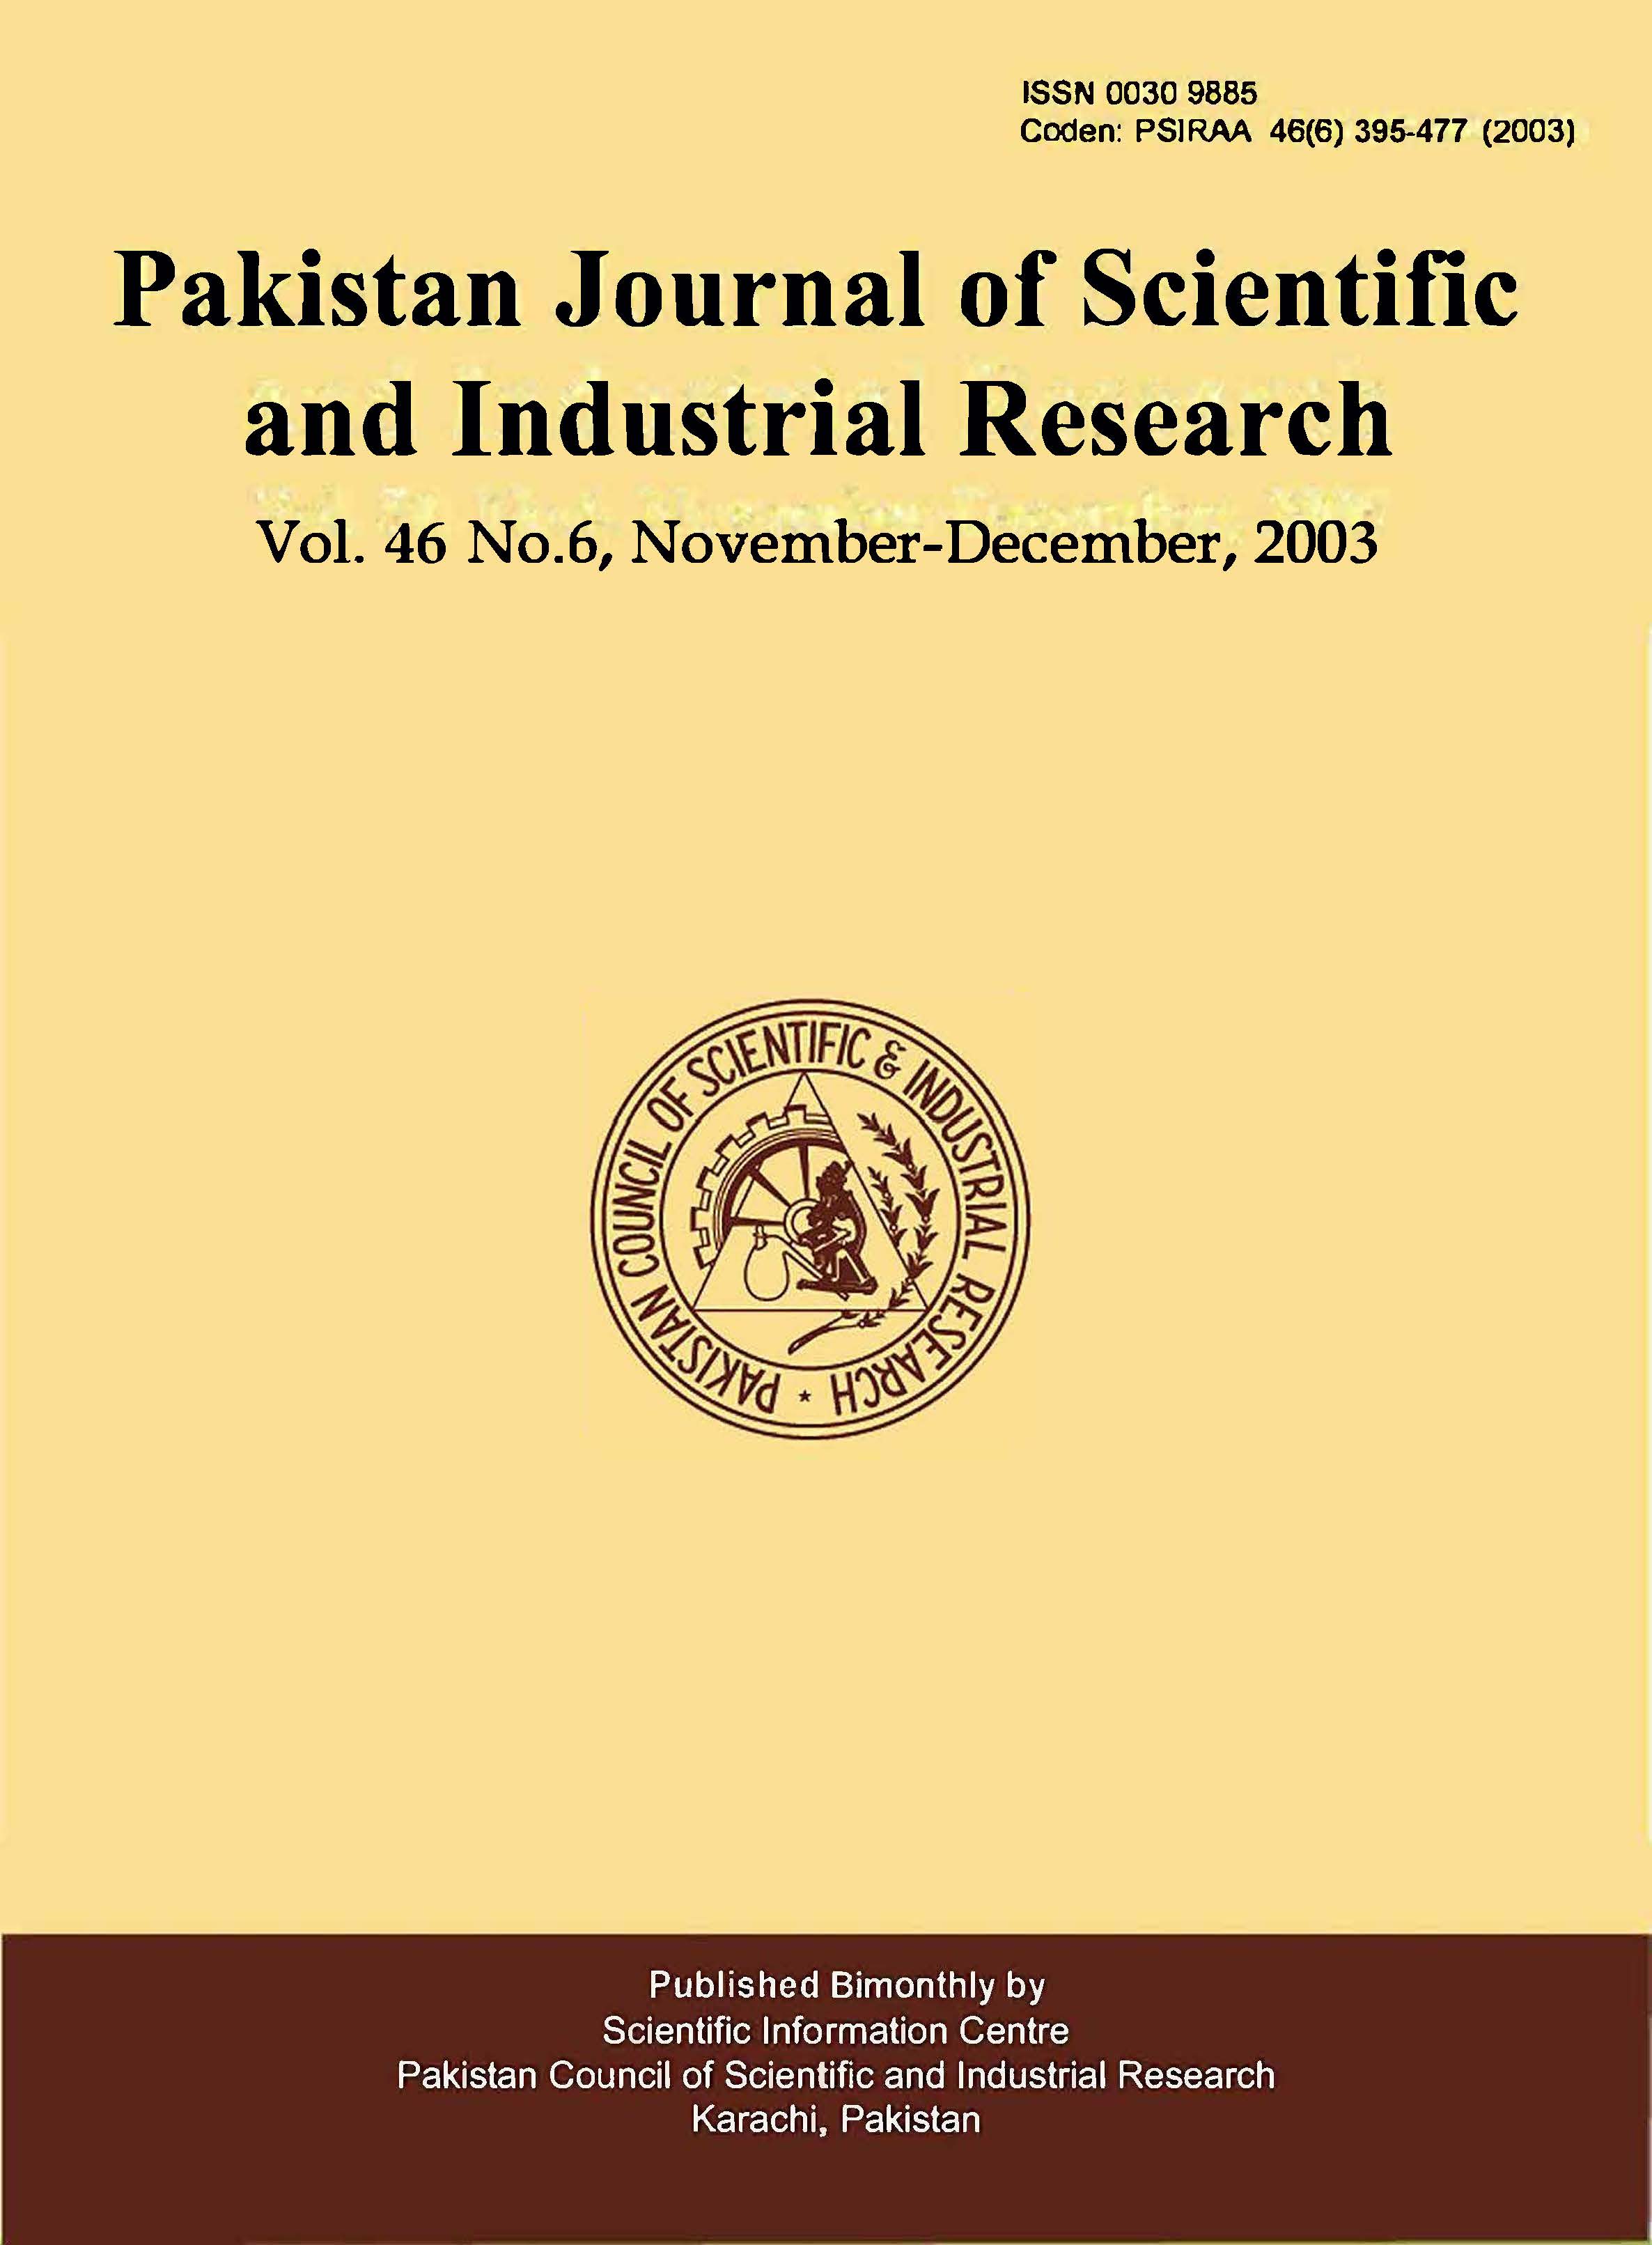 					View Vol. 46 No. 6 (2003): Pakistan Journal of Scientific and Industrial Research
				